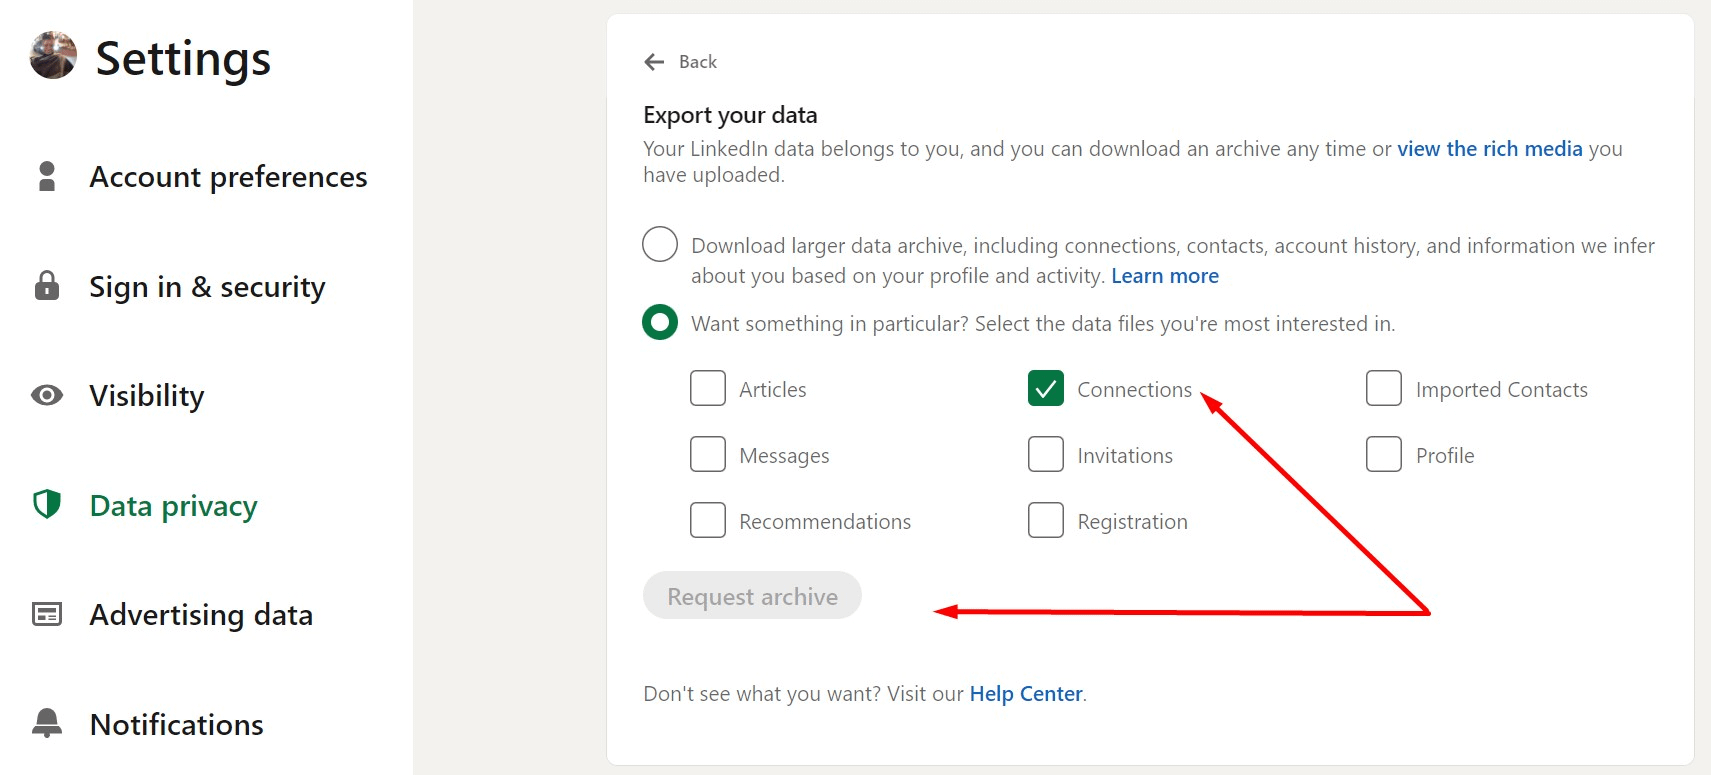 How to find someone's email address by using the LinkedIn connections download.